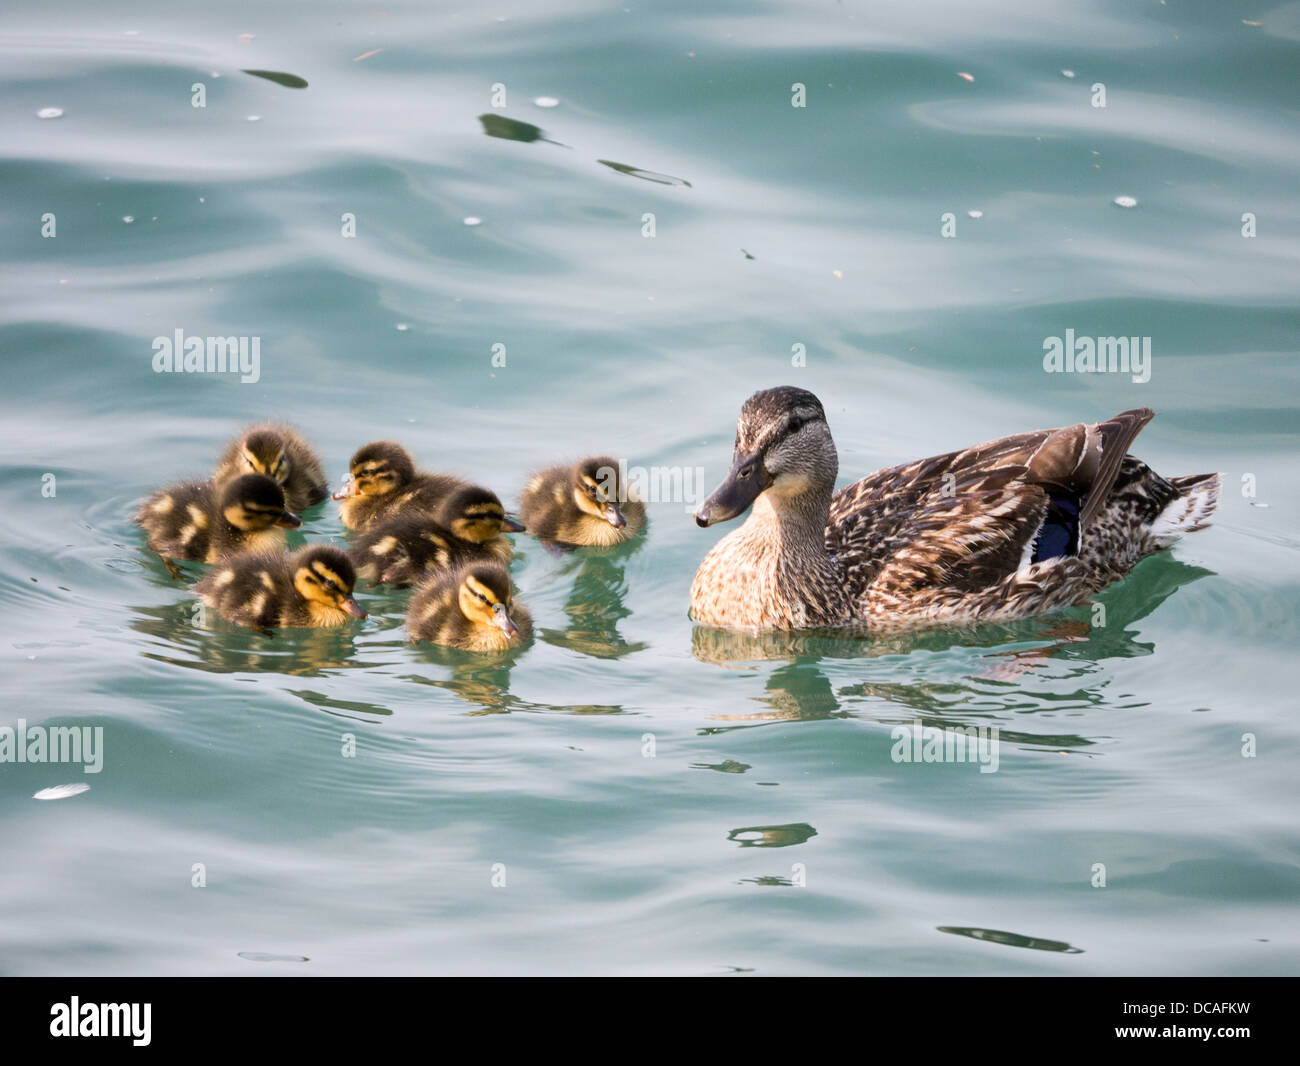 A mother duck and ducklings (family of ducks) on blue water Stock Photo